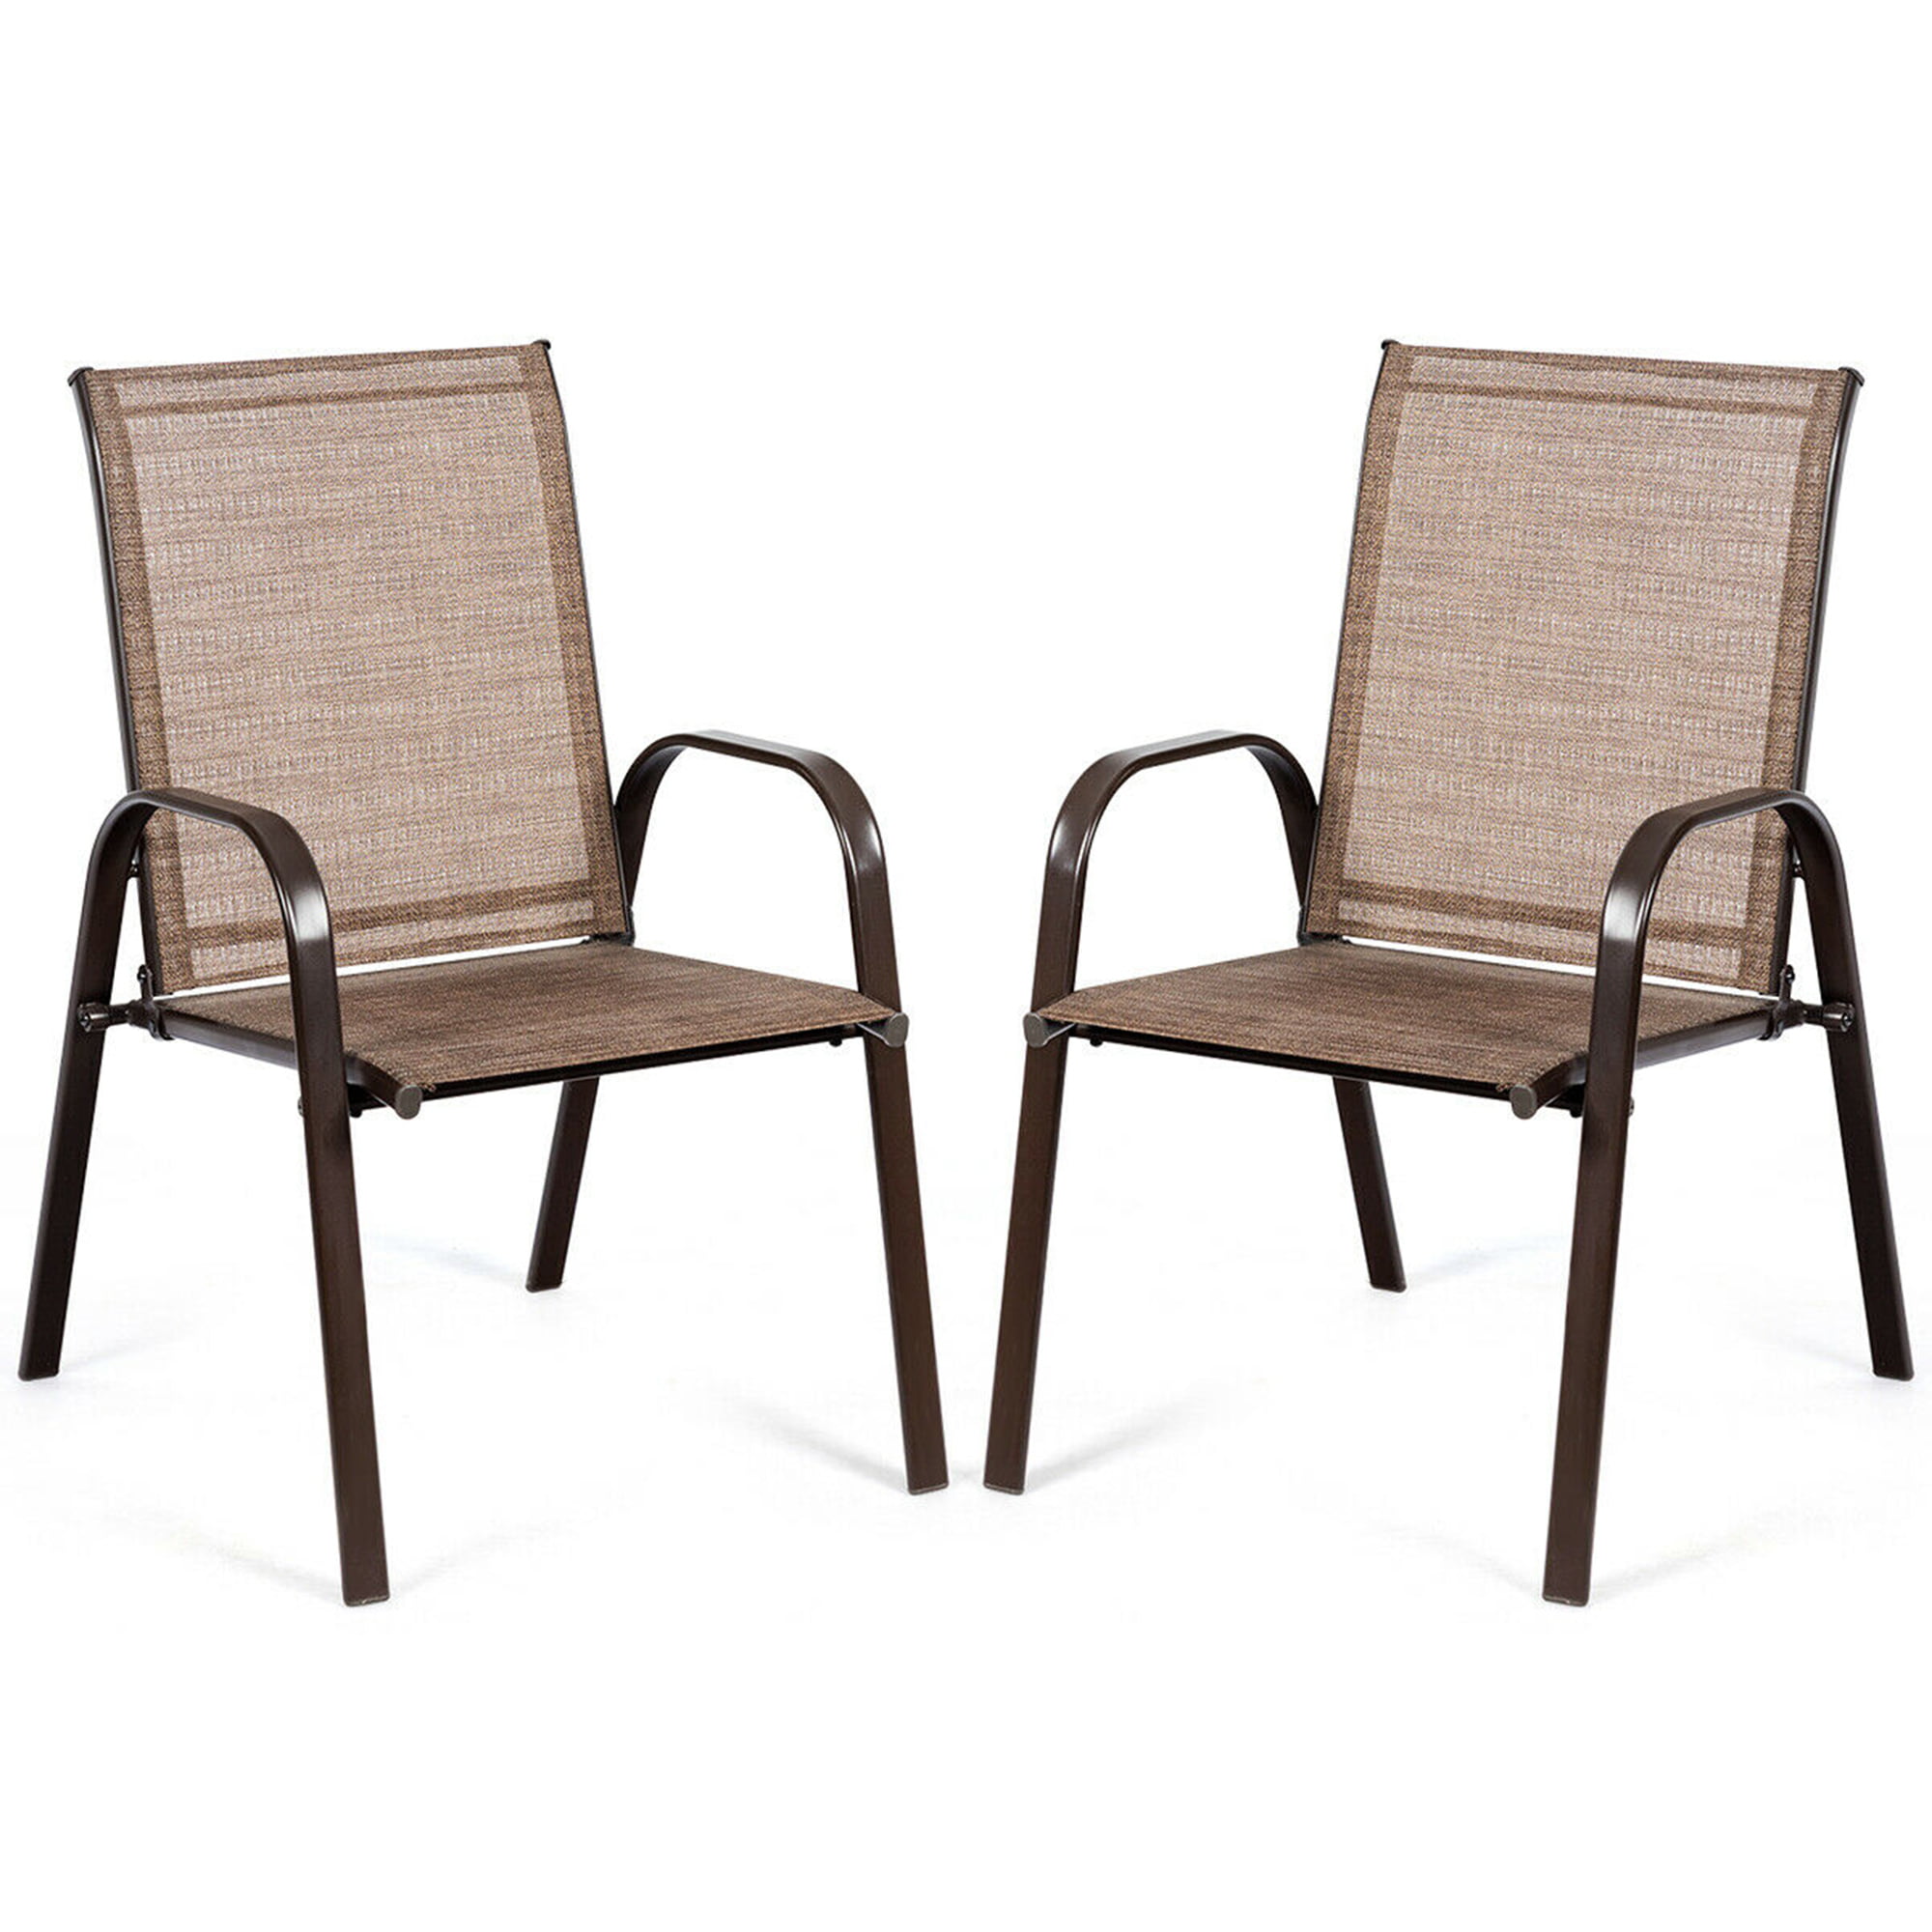 Gymax Set of 2 Patio Chairs Dining Chairs Garden Outdoor w/ Armrest